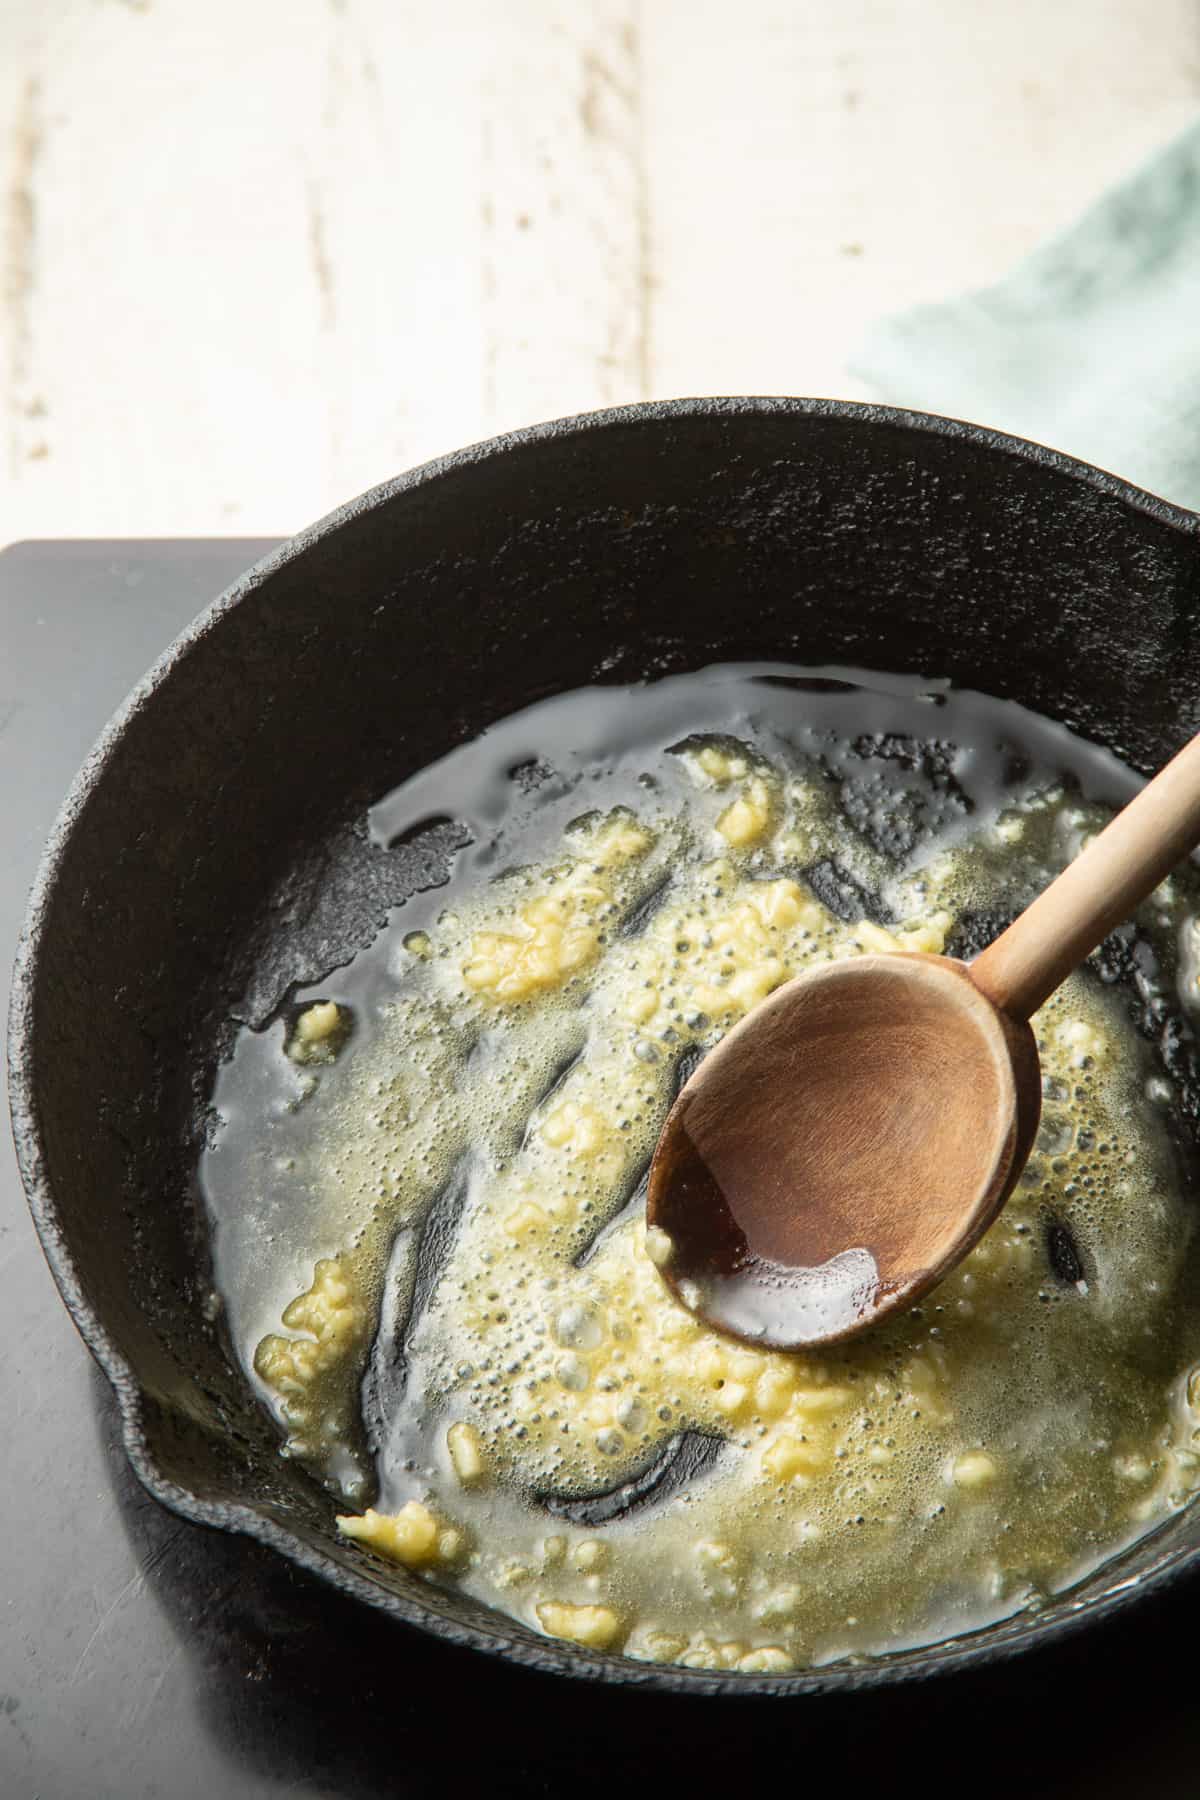 Mixture of garlic, flour and olive oil cooking in a skillet.